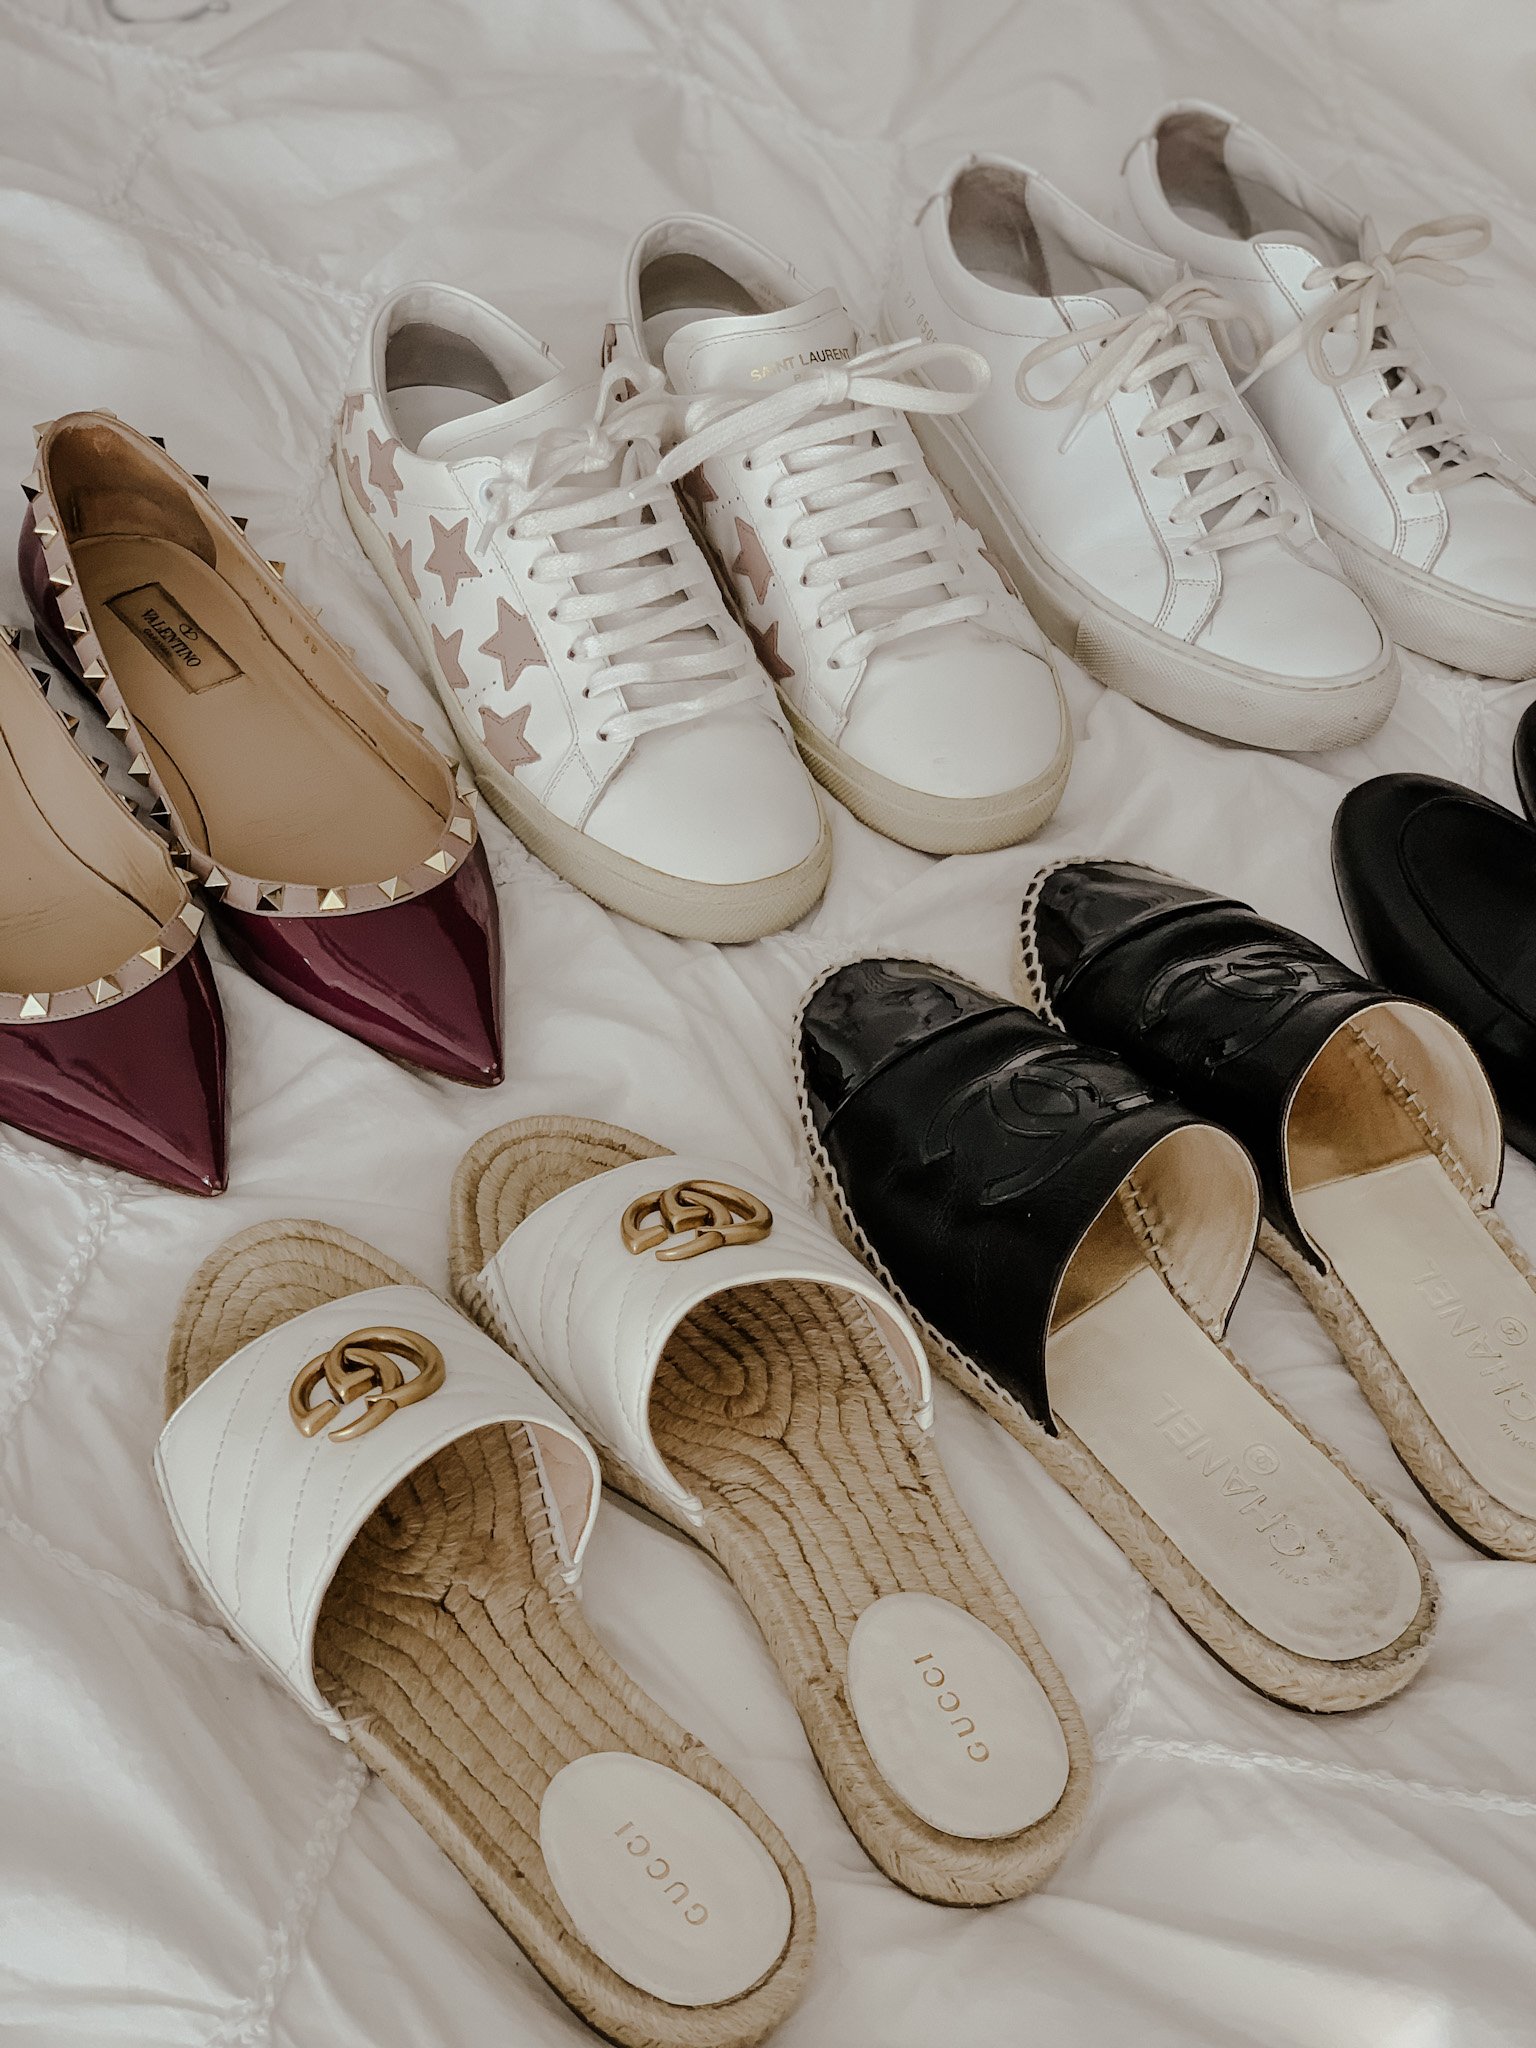 When to spend money on Designer Shoes